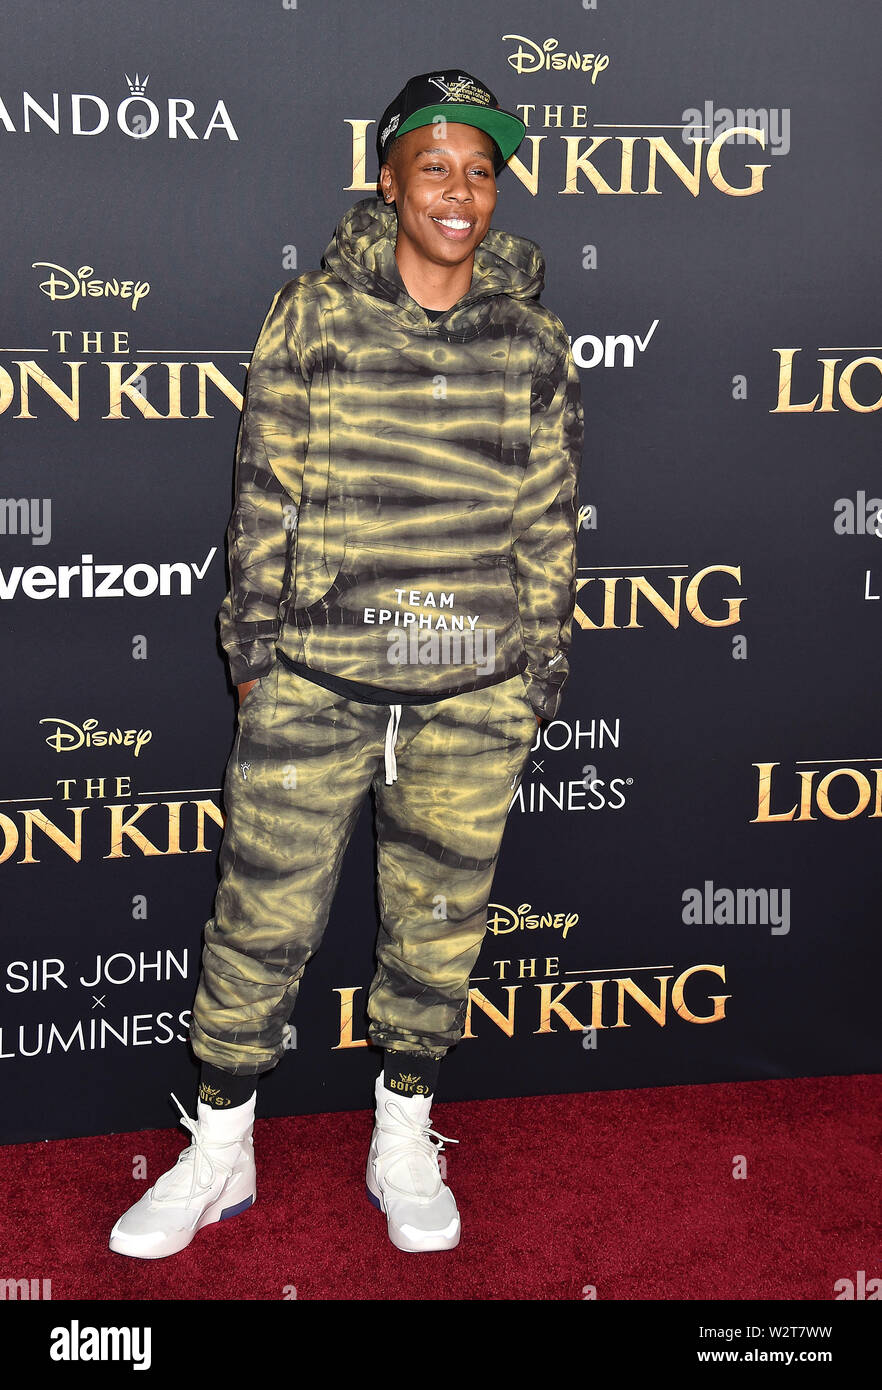 HOLLYWOOD, CA - JULY 09: Lena Waithe attends the premiere of Disney's 'The Lion King' at the Dolby Theatre on July 09, 2019 in Hollywood, California. Stock Photo